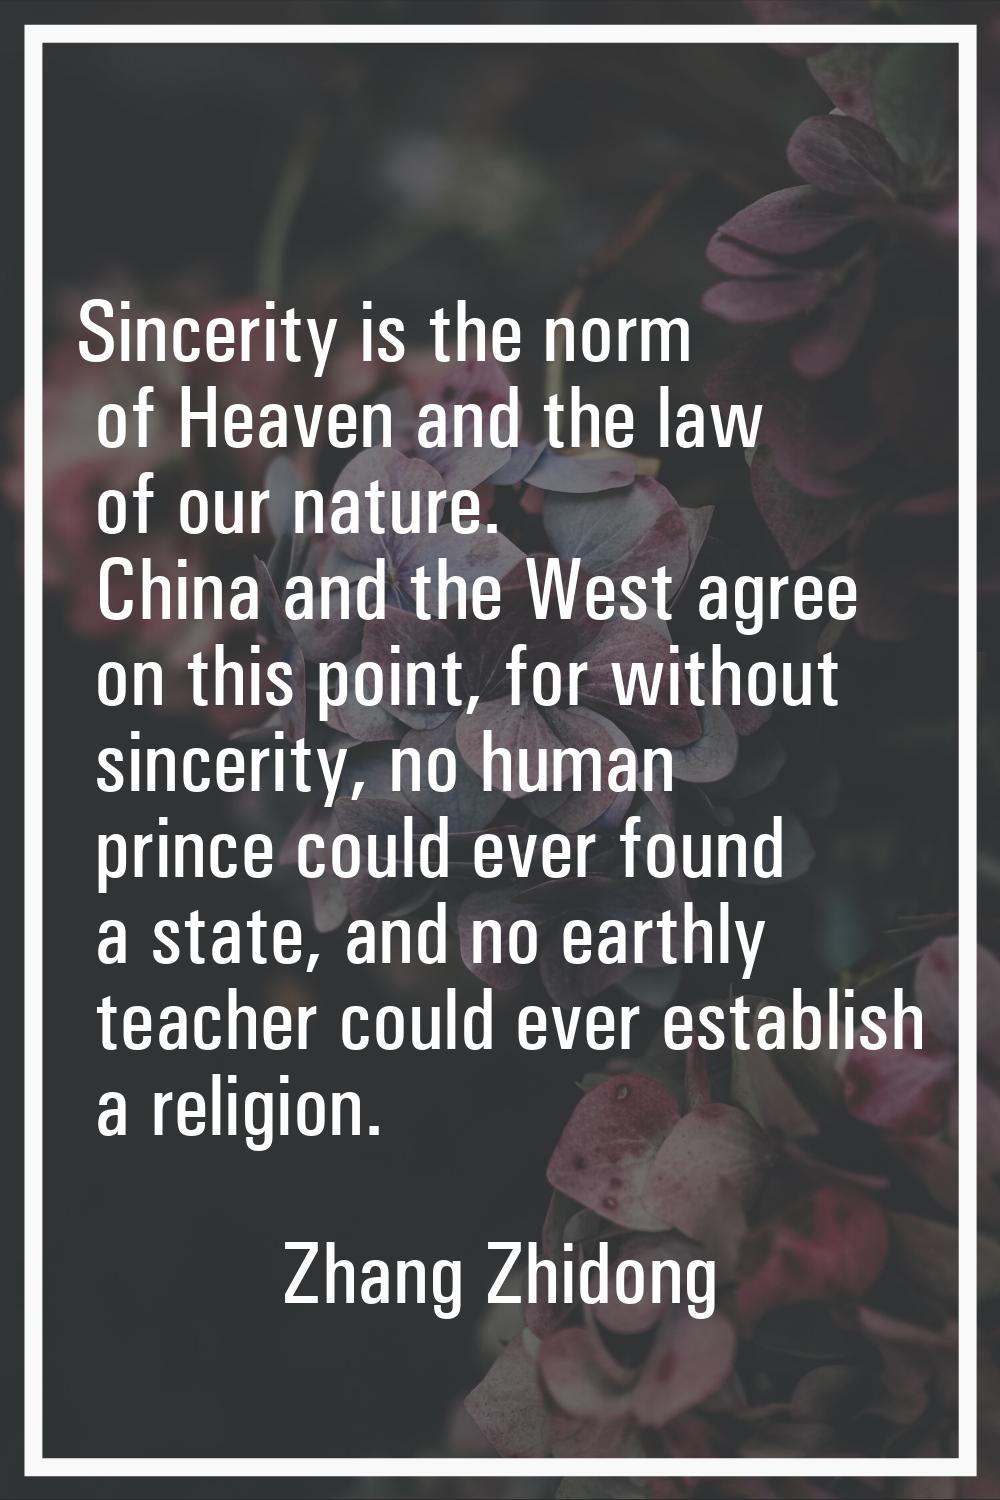 Sincerity is the norm of Heaven and the law of our nature. China and the West agree on this point, 